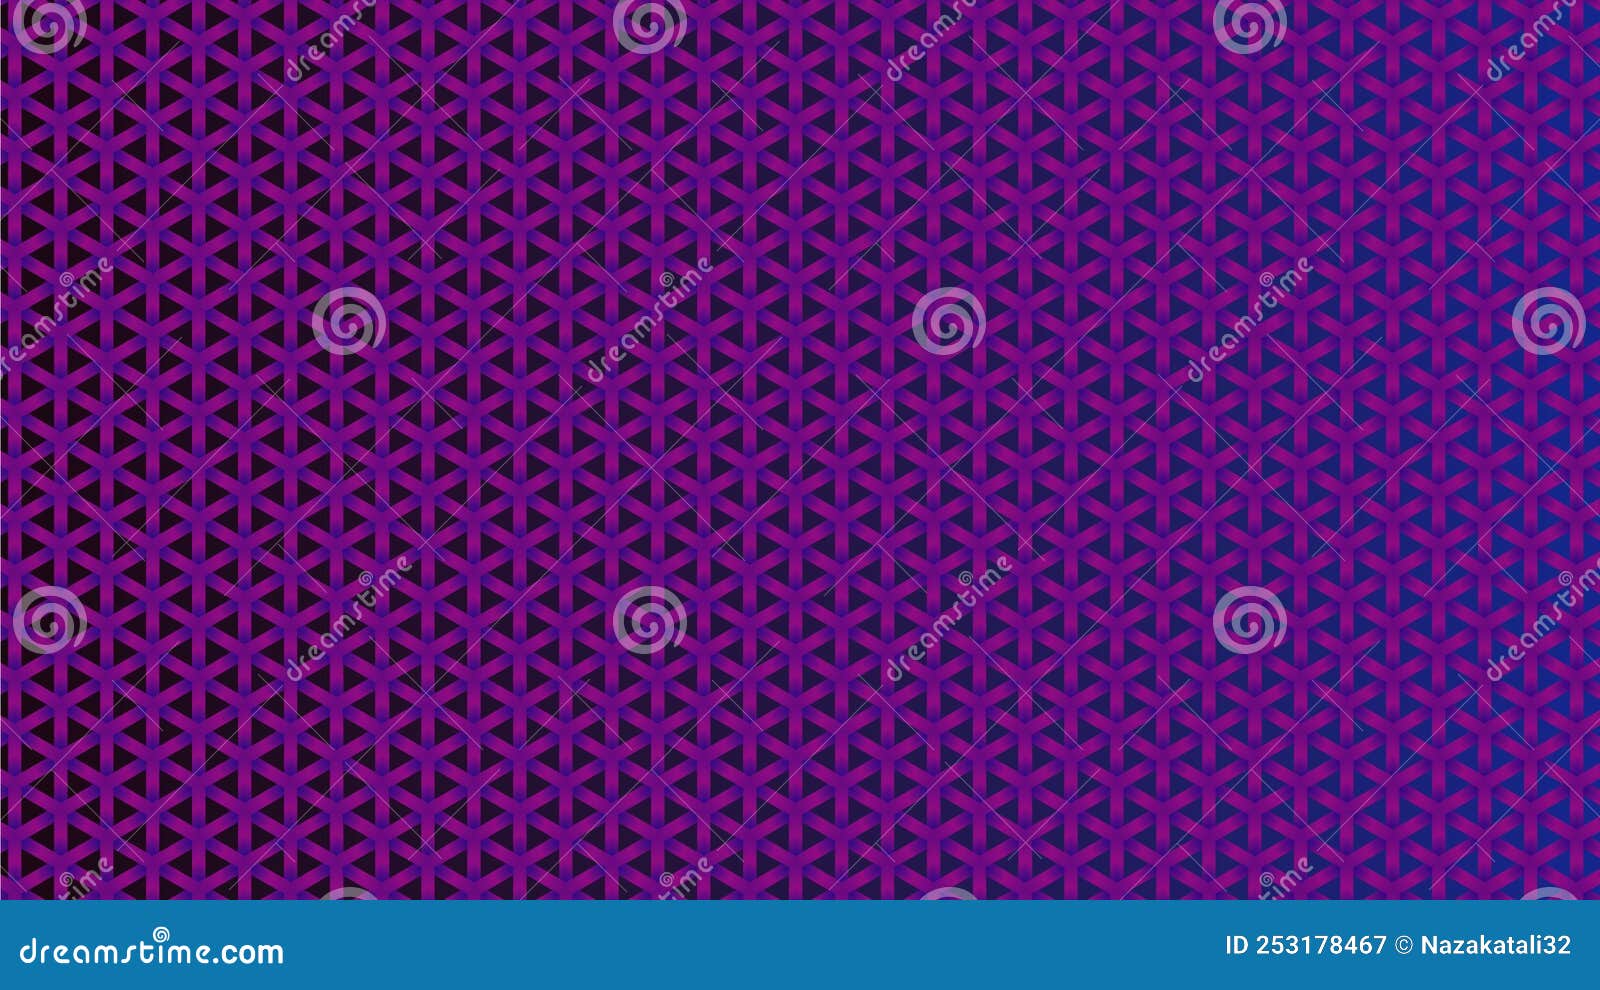 Background of a Bright Vibrant Colors Flowing through a Digital Metaverse  Stock Illustration - Illustration of wave, background: 277922305